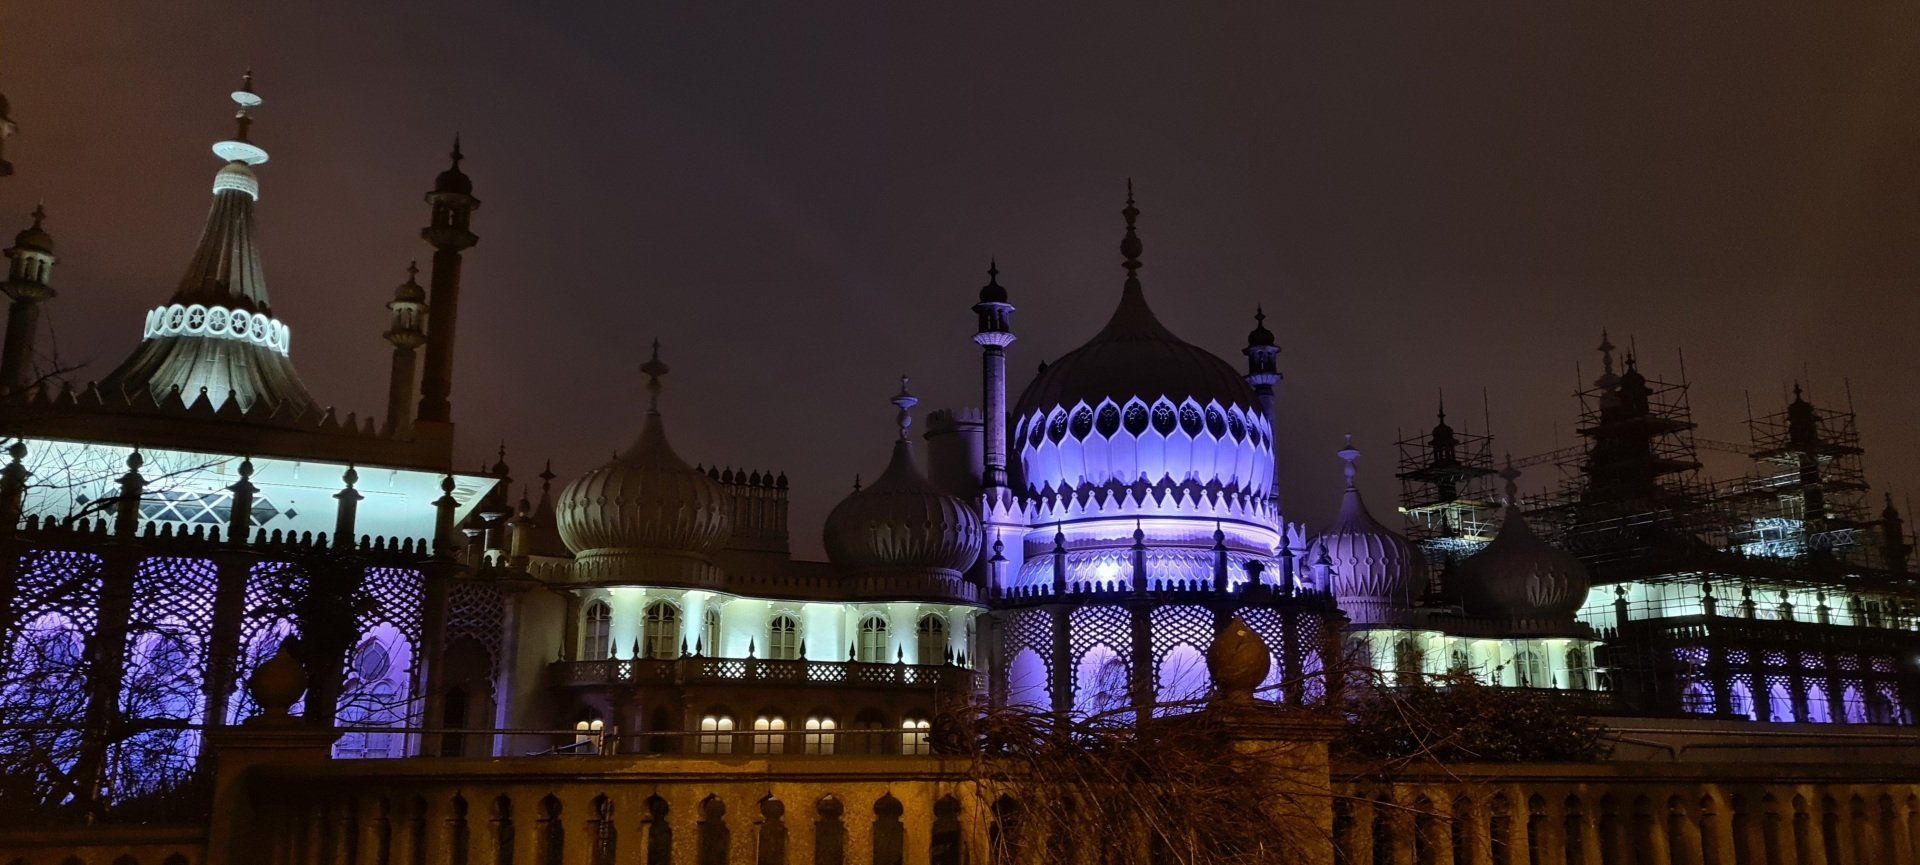 Royal Pavilion in Brighton, East Sussex, England, UK